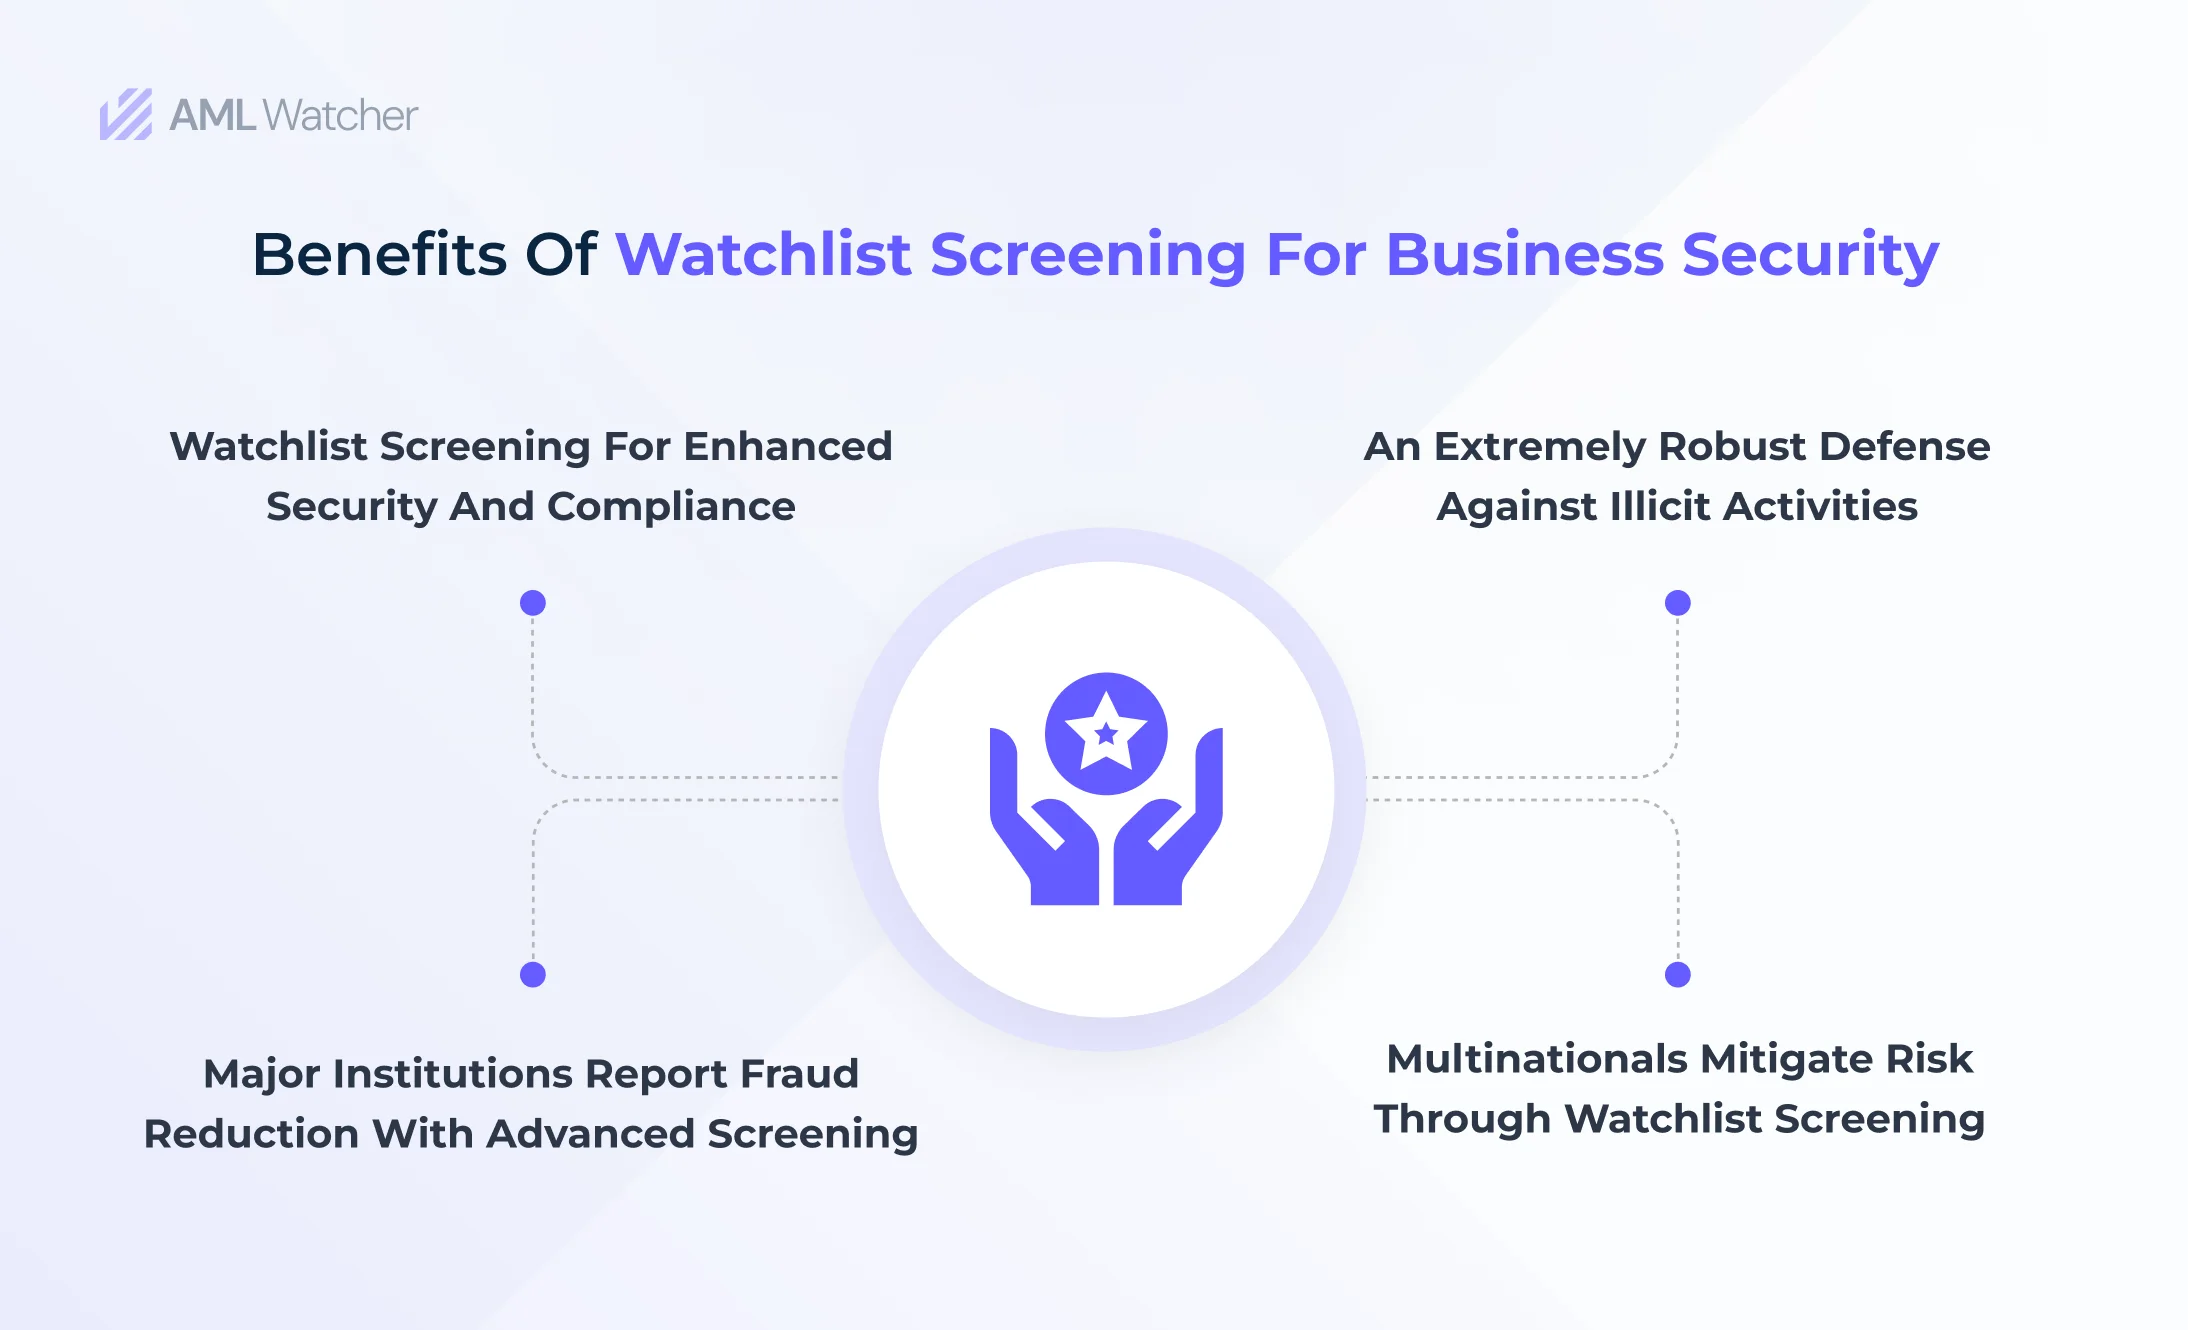 Watchlist screening has a myriad of benefits when it comes to safeguarding the system and ensuring safe customer onboarding.